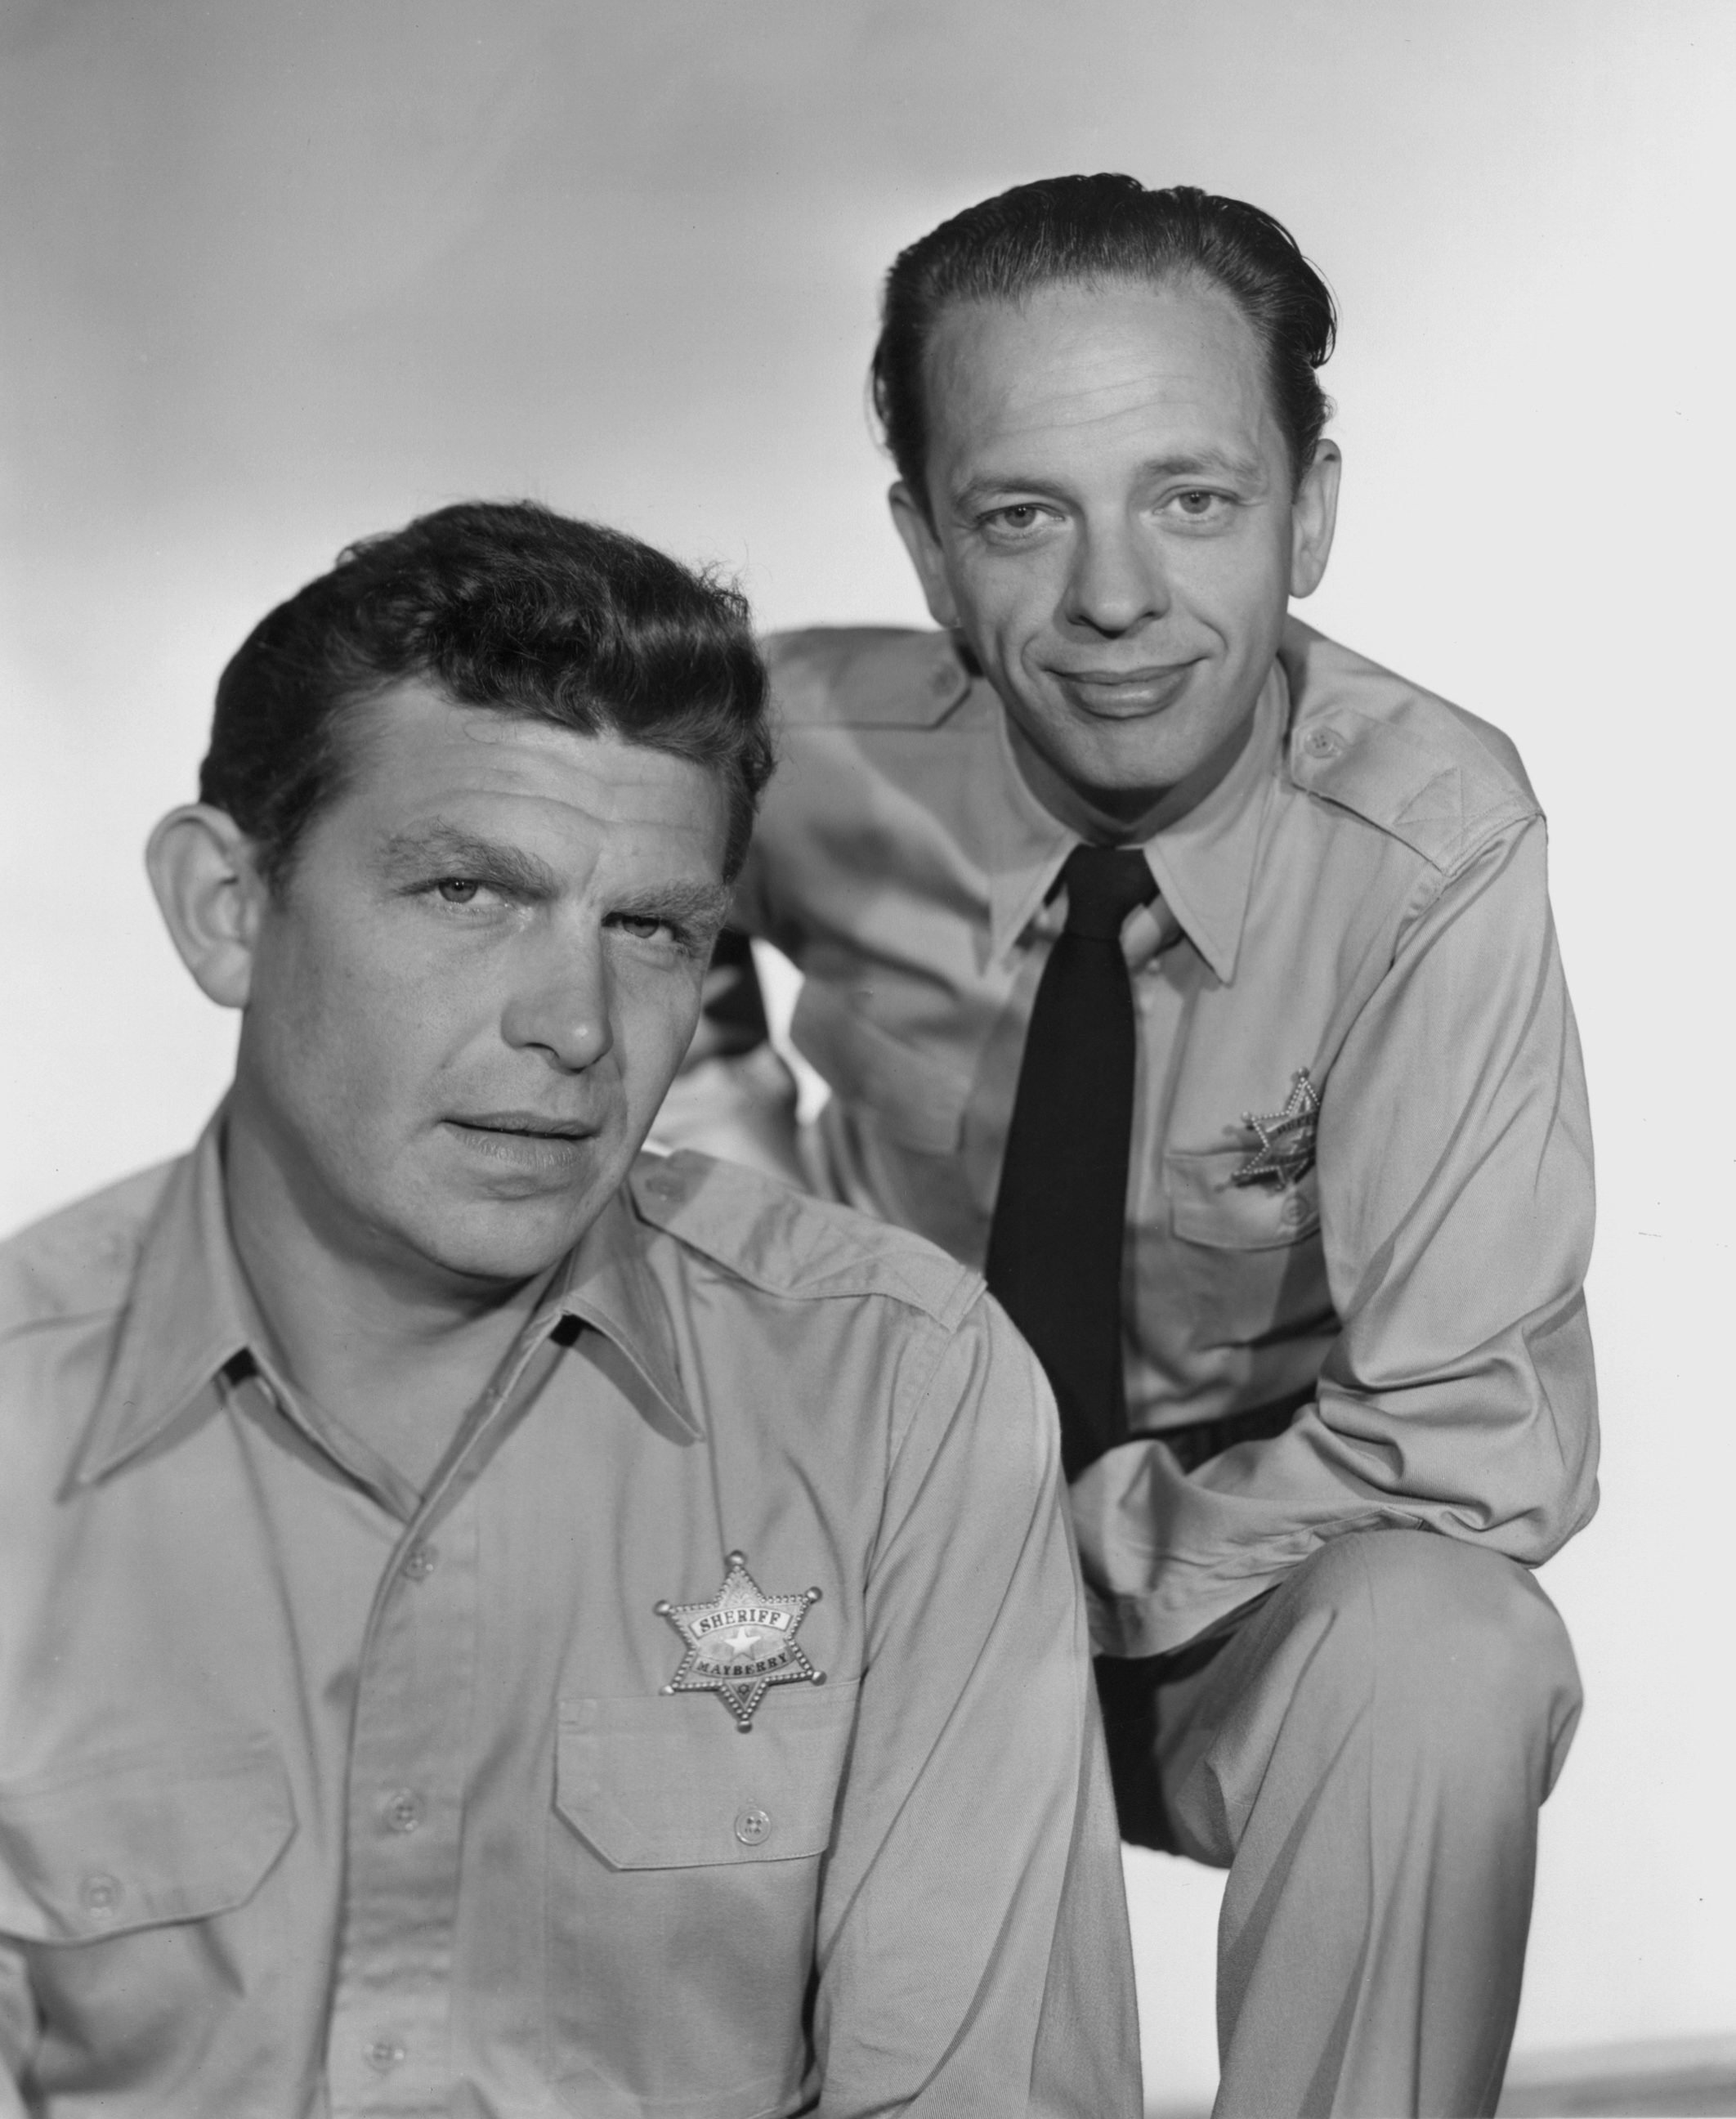 Andy Griffith and Don Knotts, 1960